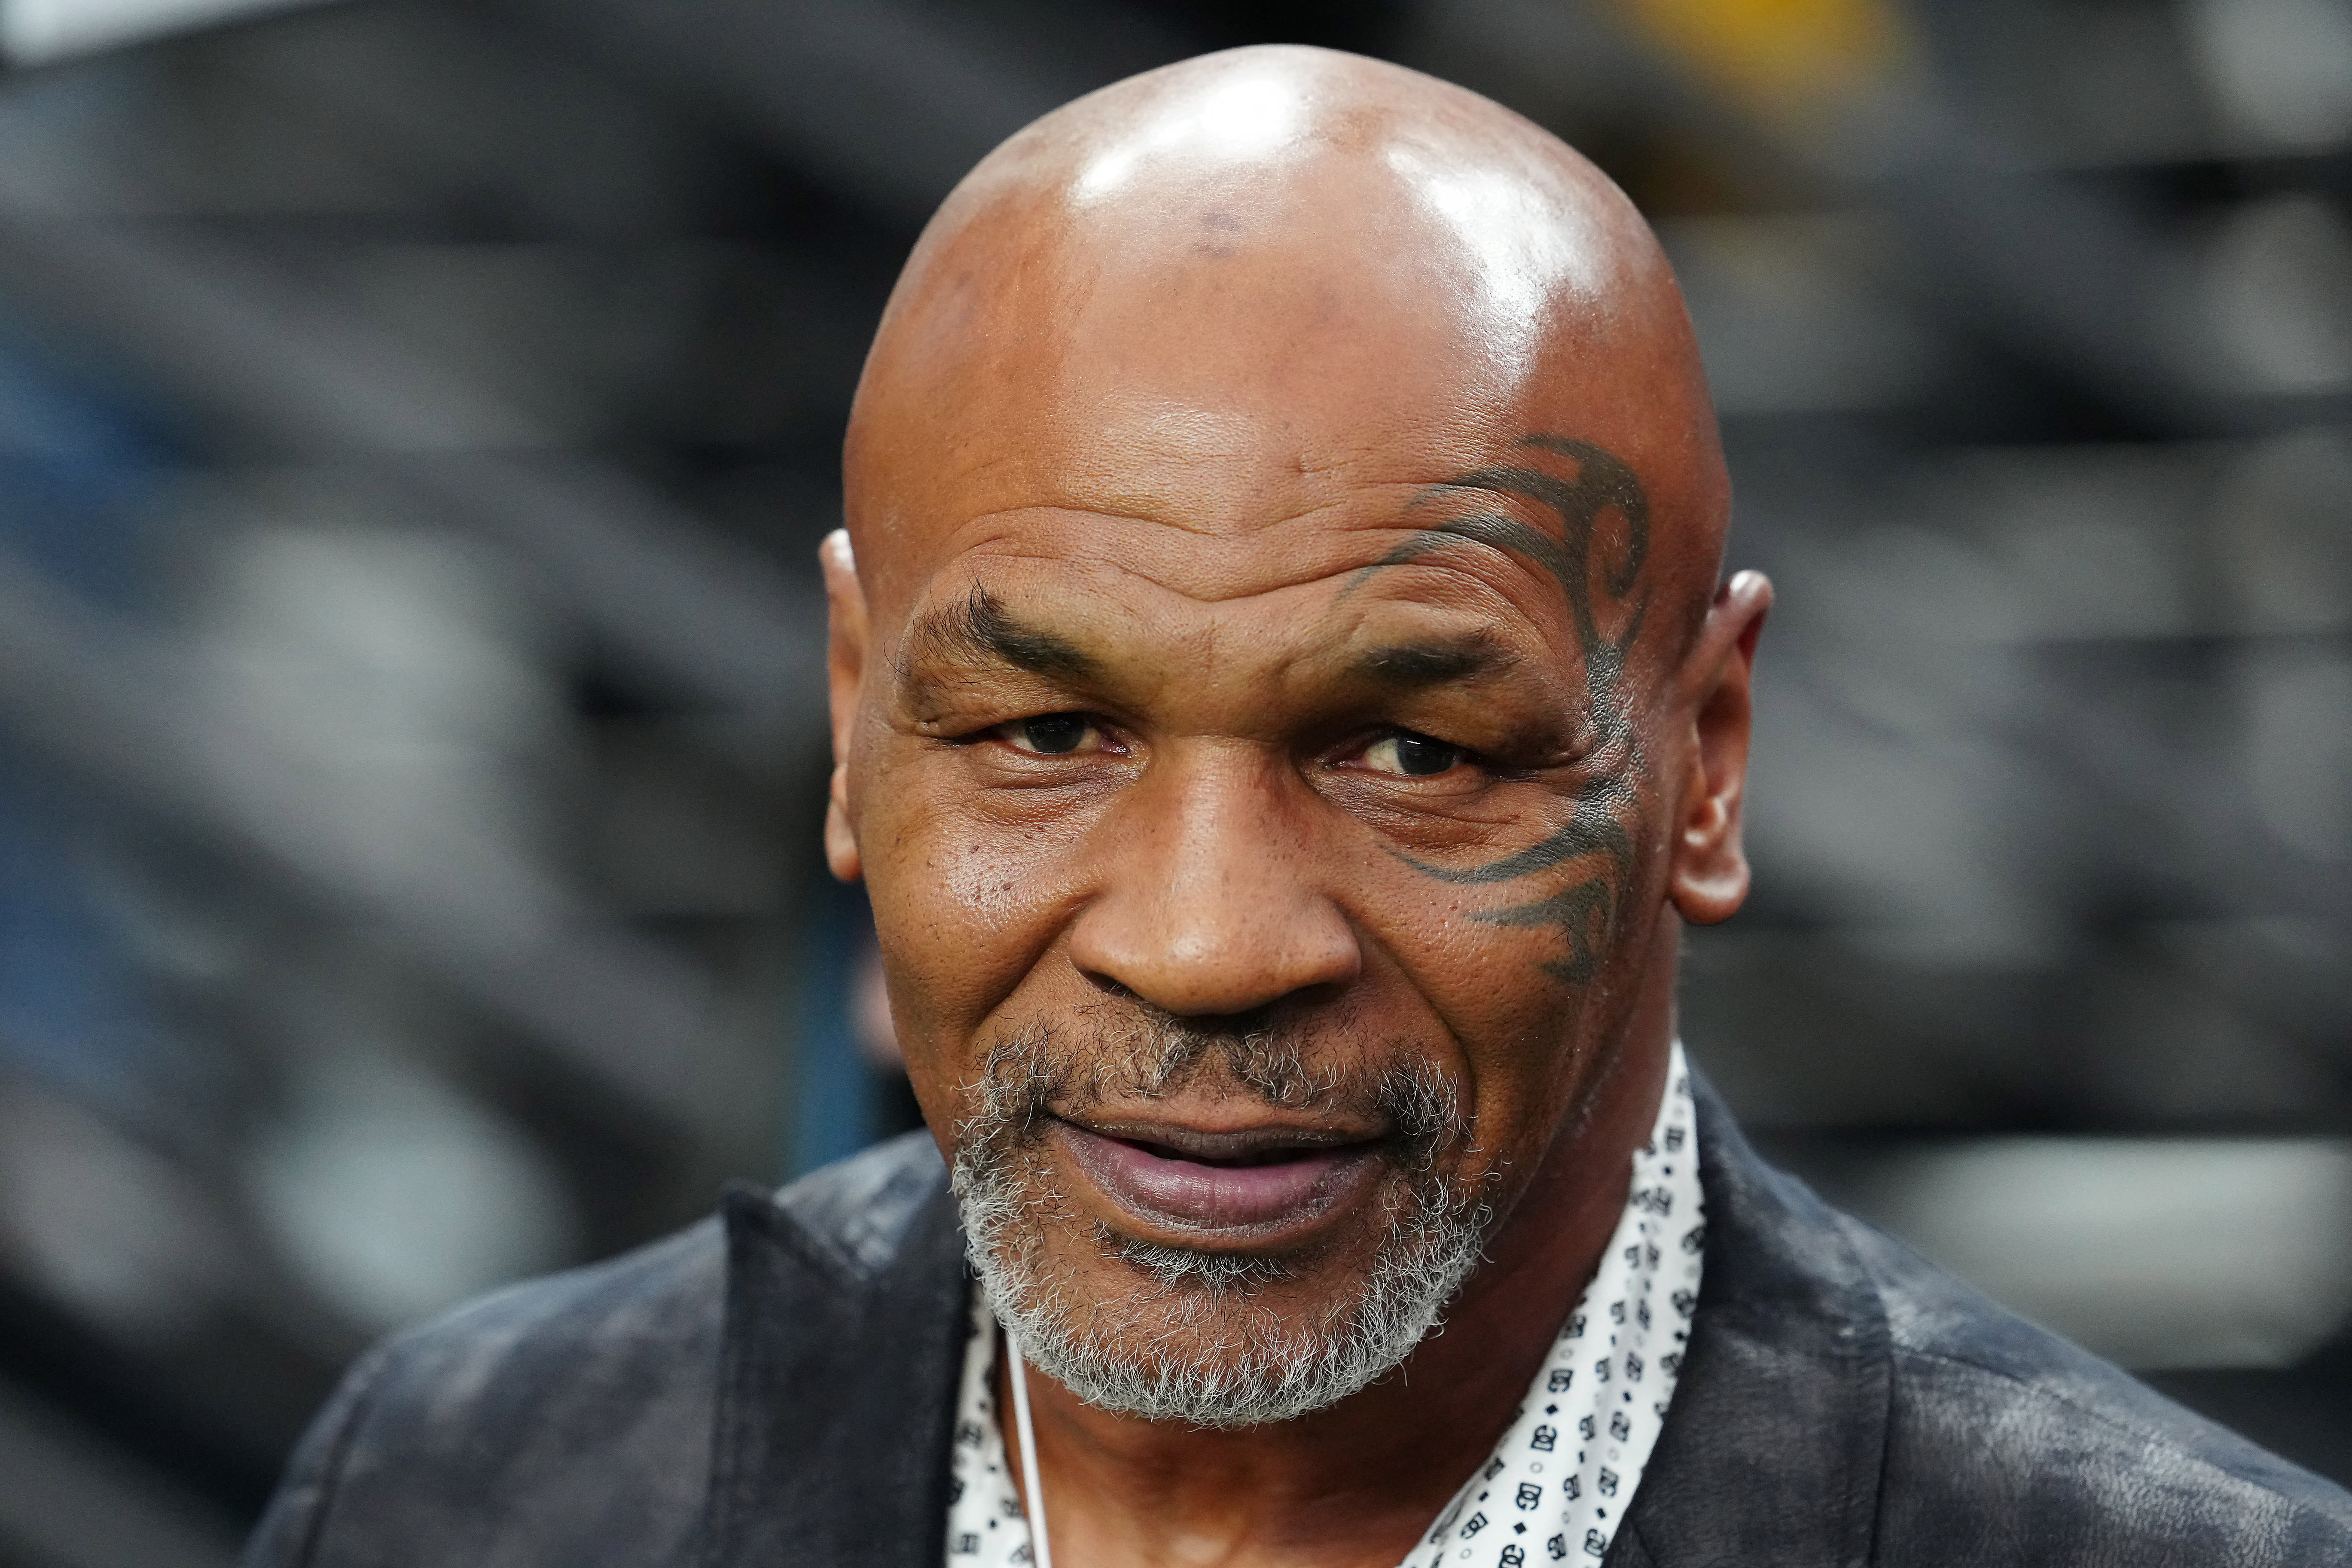 Mike Tyson 'feeling 100%' after reported medical scare on plane